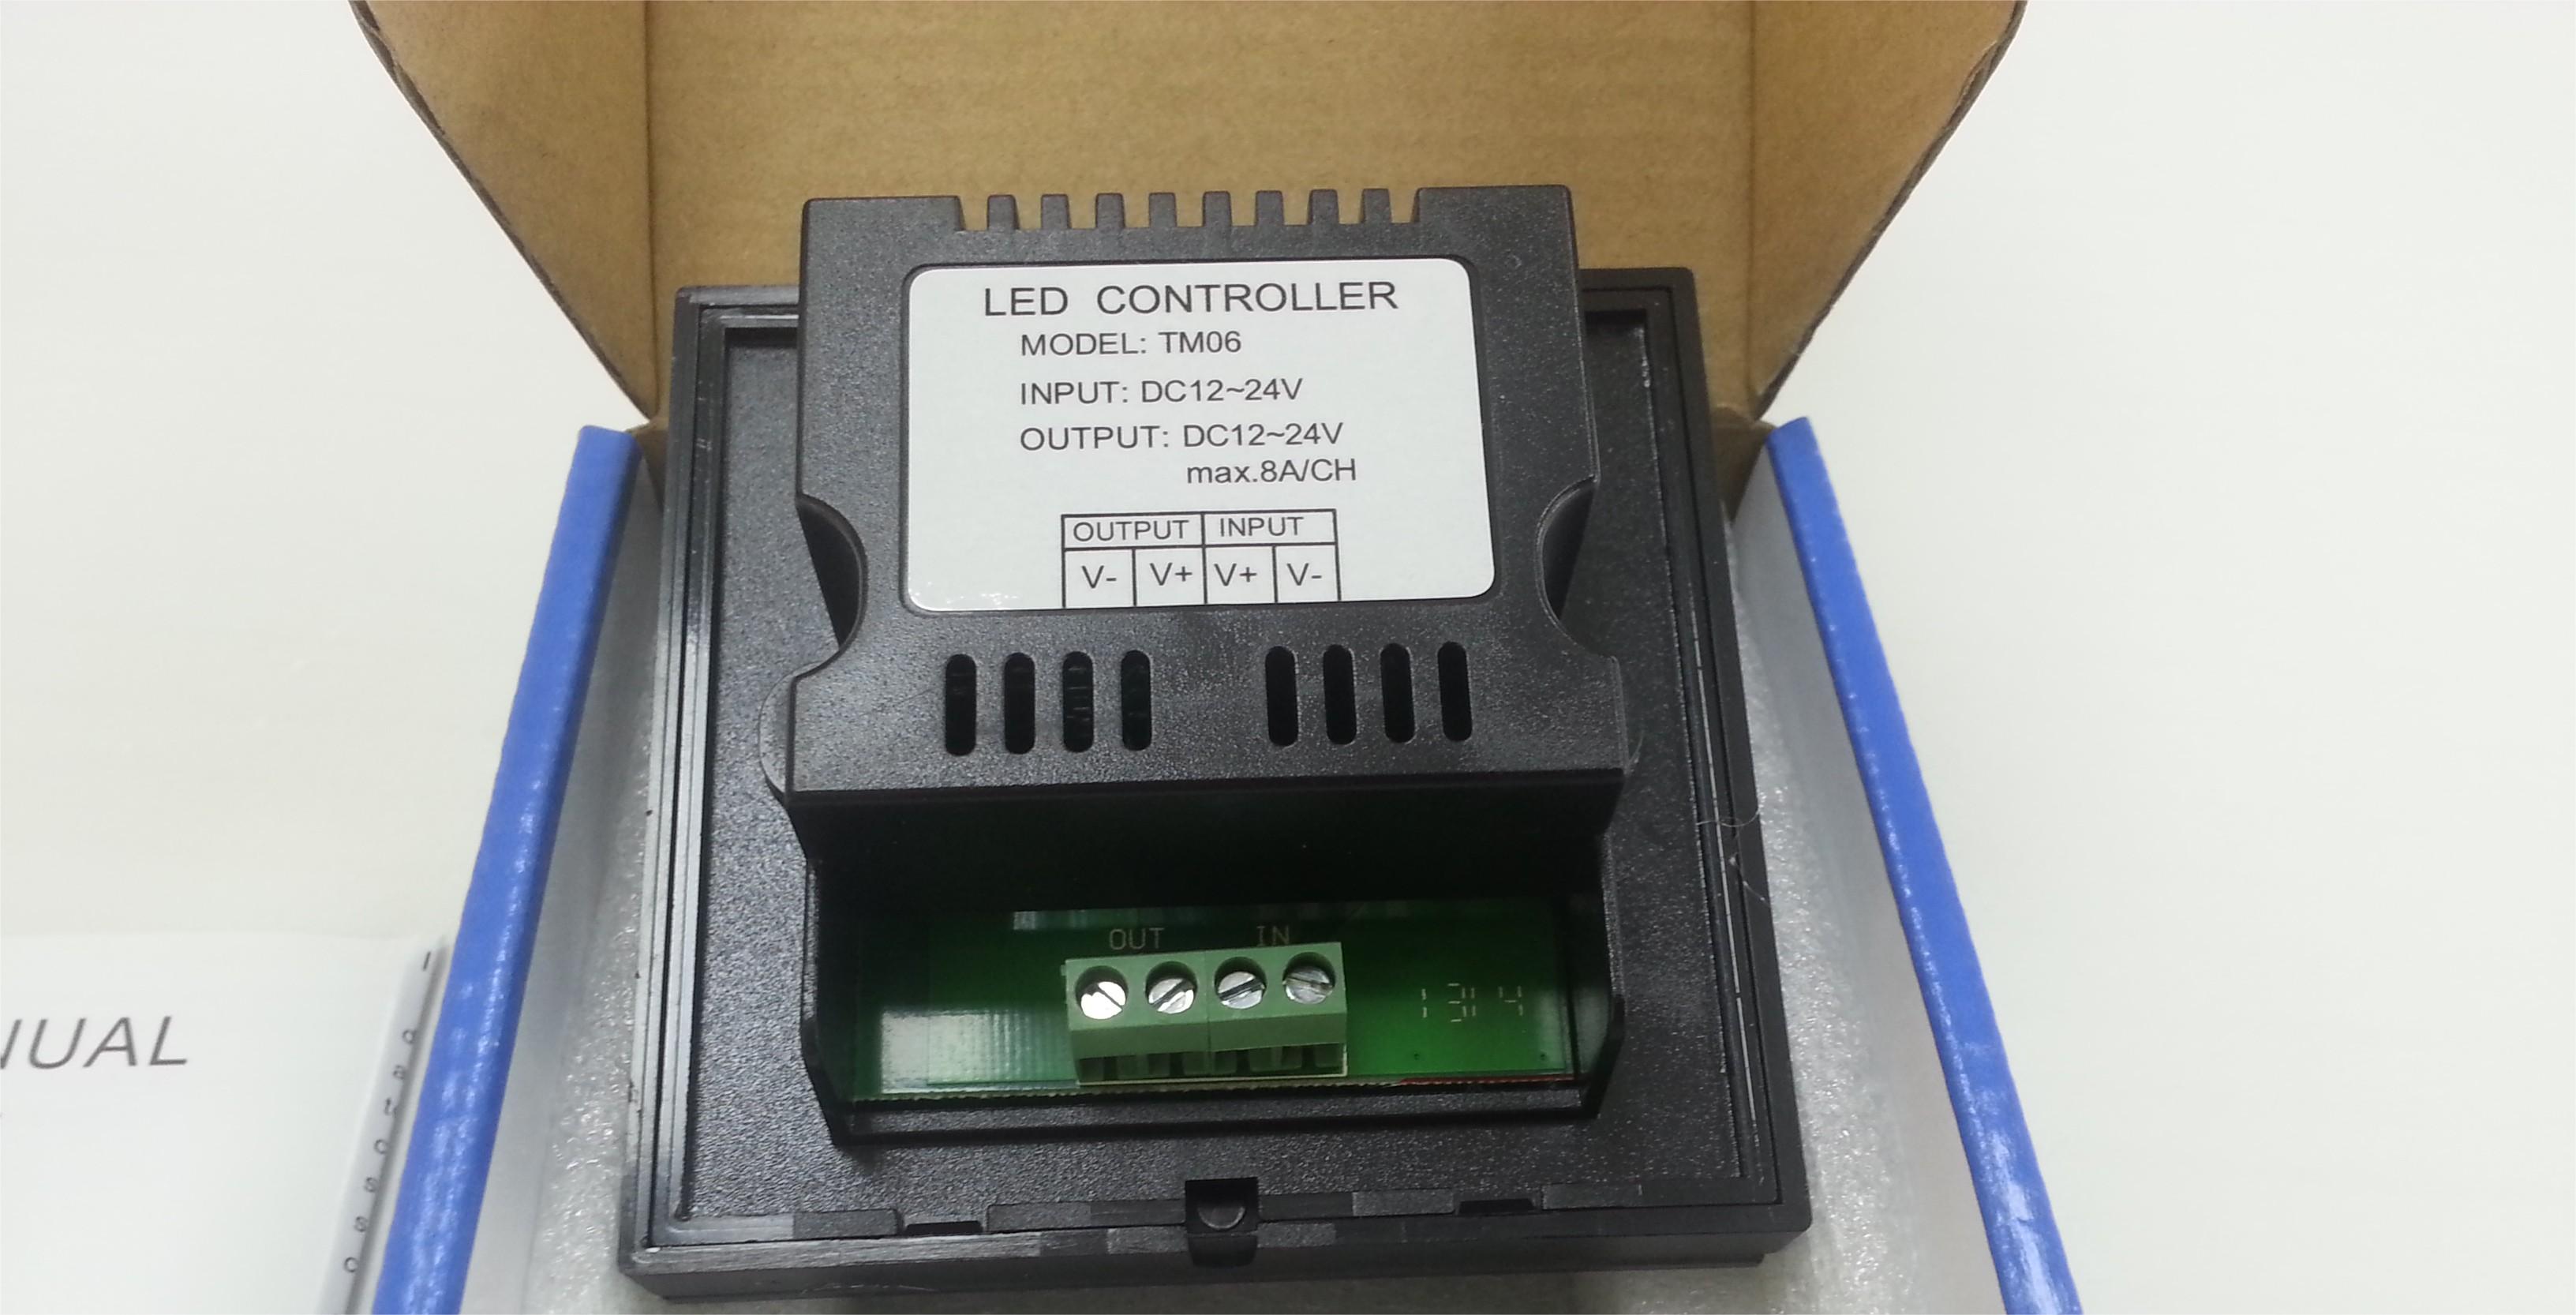 LED_Touching_Panel_Dimmer_for_Single_Color_LED_Strip_Light_Controllers